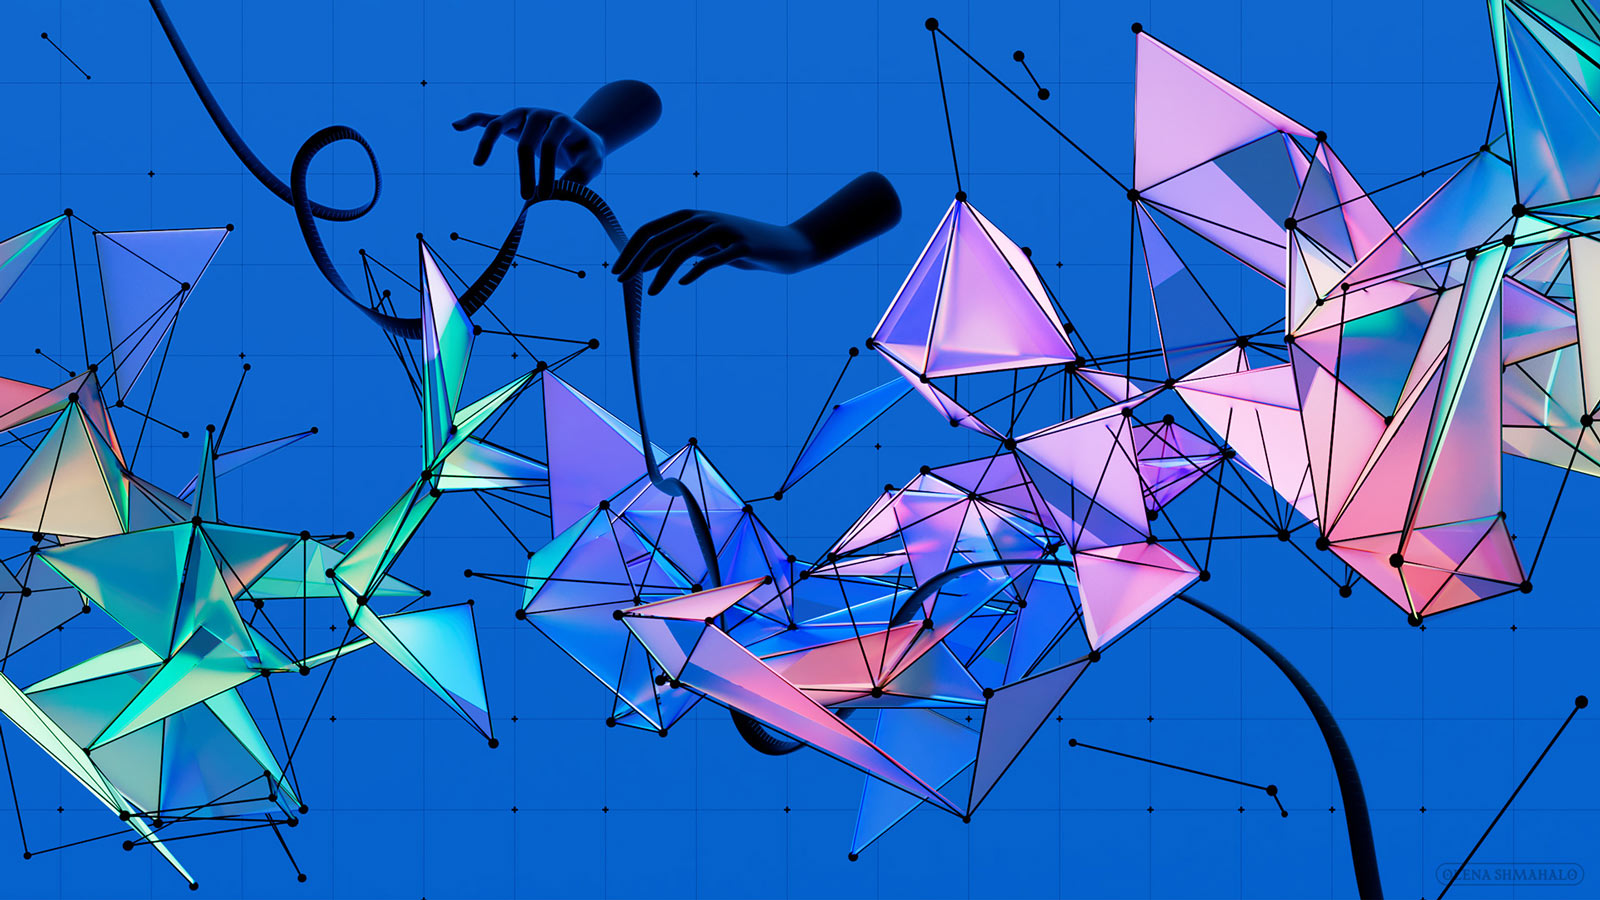 3D art: disembodied hands measuring various parts of a colorful network graph.